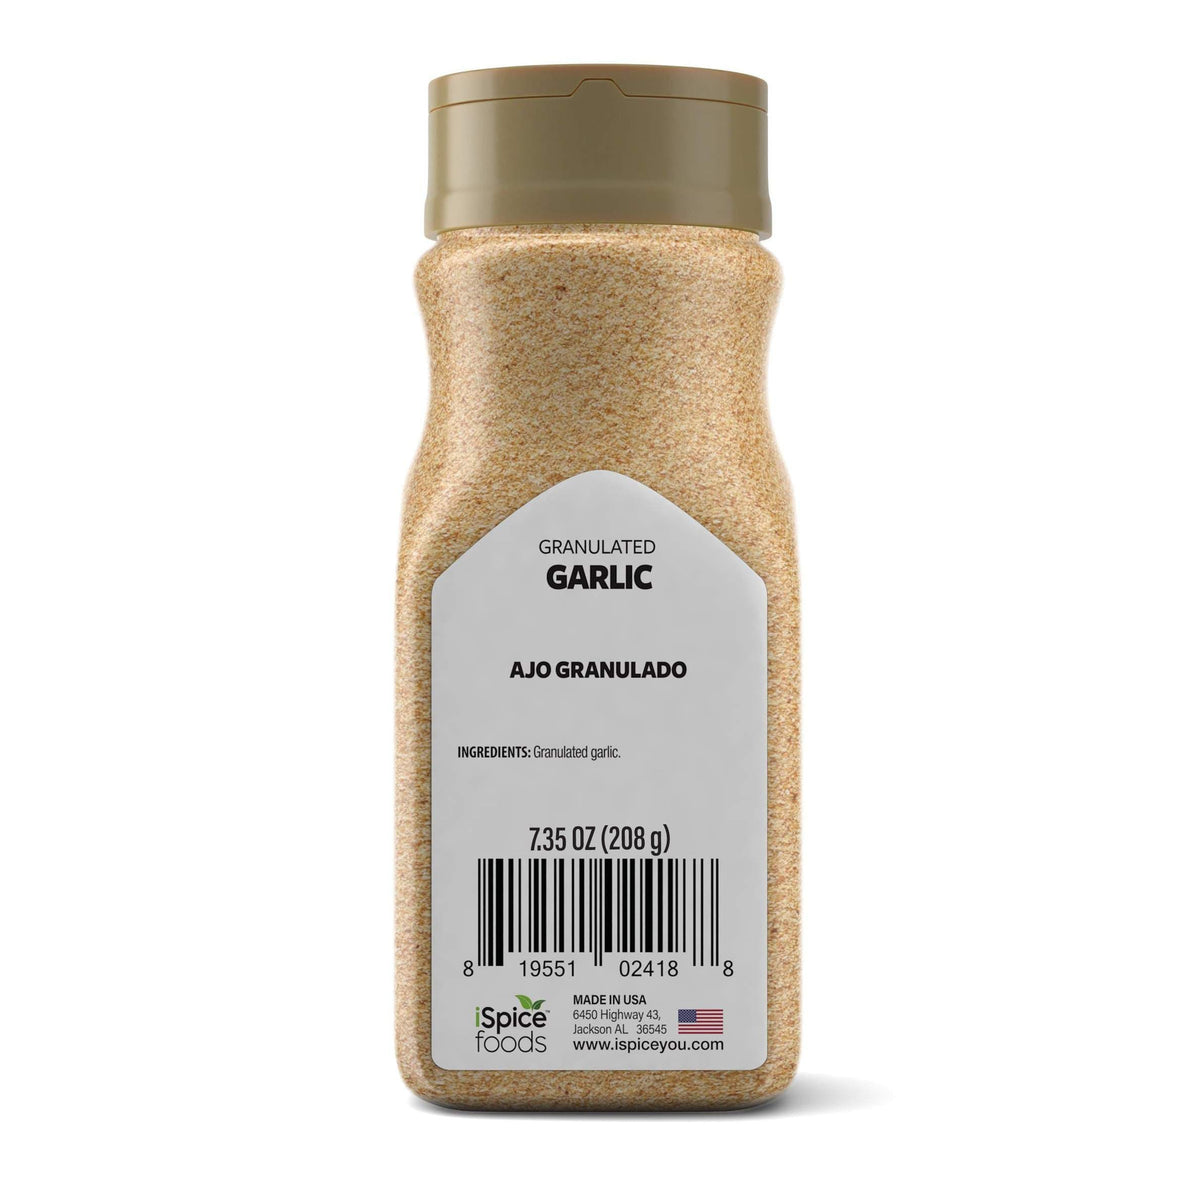 How to Use Granulated Garlic in Your Cooking